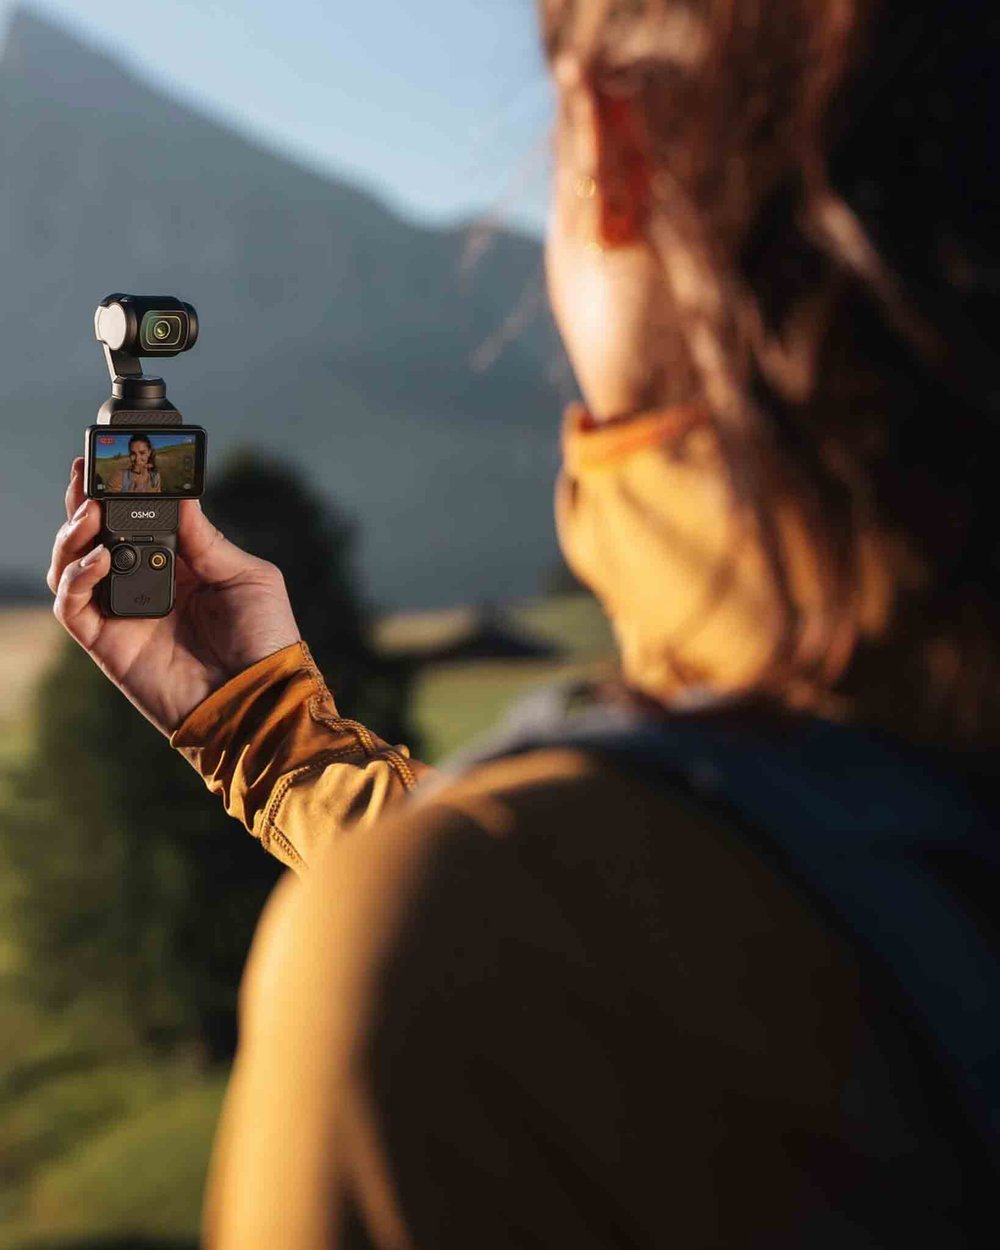 Osmo Pocket 3 - Video Capabilities - Is it Worth Buying - The Wildest Road Blog Gear Reviews.jpg